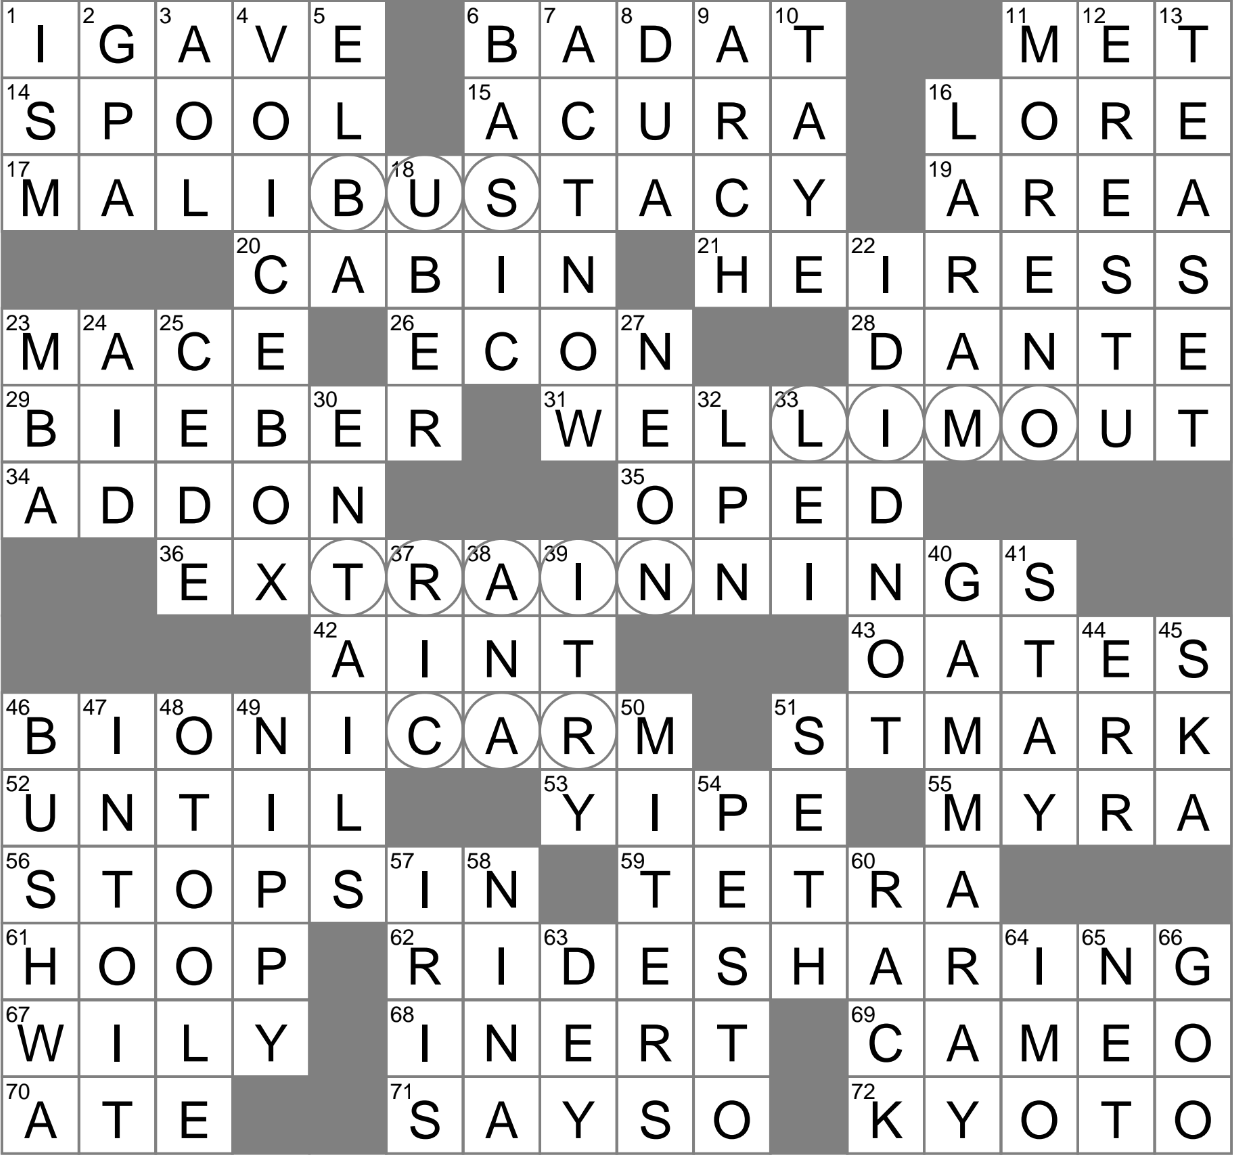 used as a campaign talking point crossword puzzle